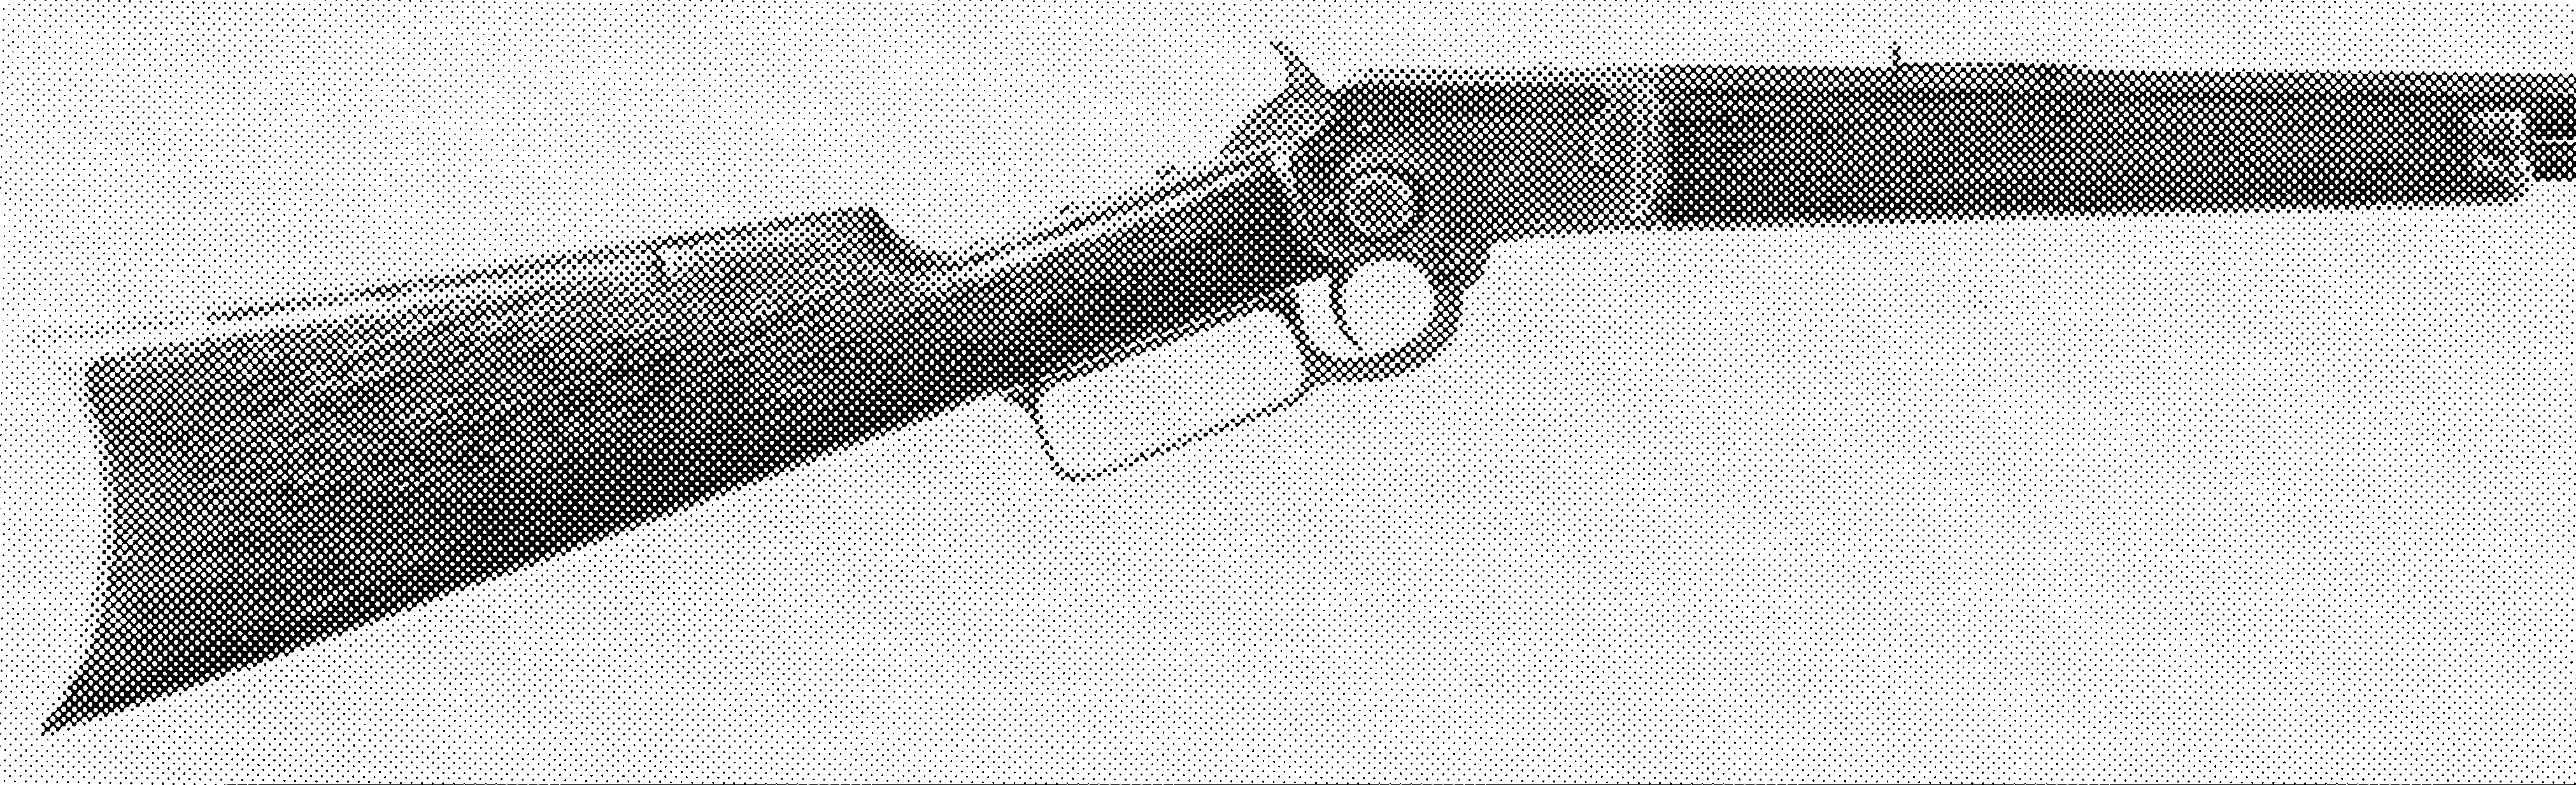 Model 1897 Lever-Action Rifle